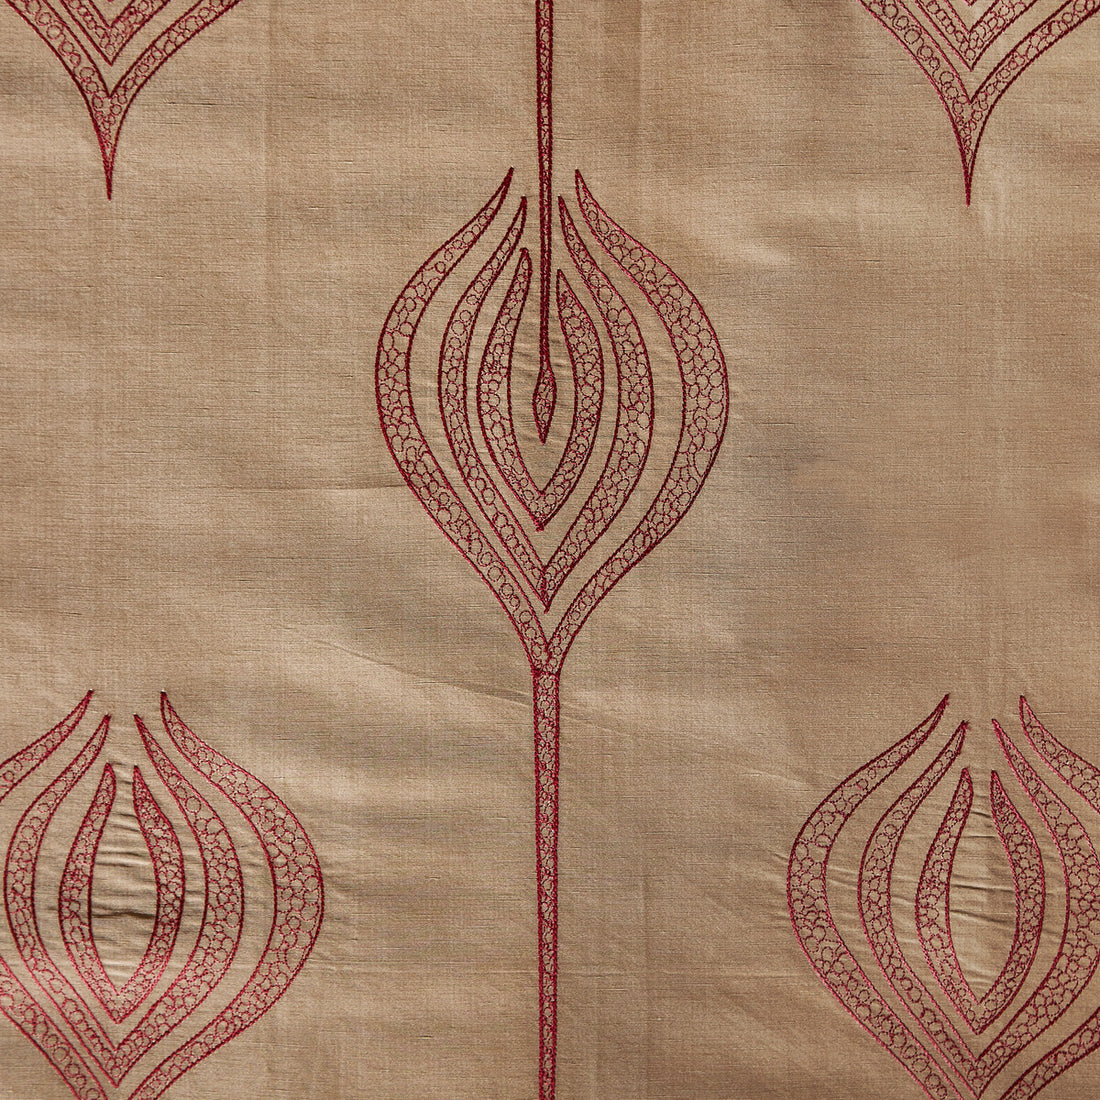 Tulip Embroidery fabric in rust color - pattern GWF-2928.22.0 - by Lee Jofa Modern in the Allegra Hicks II collection